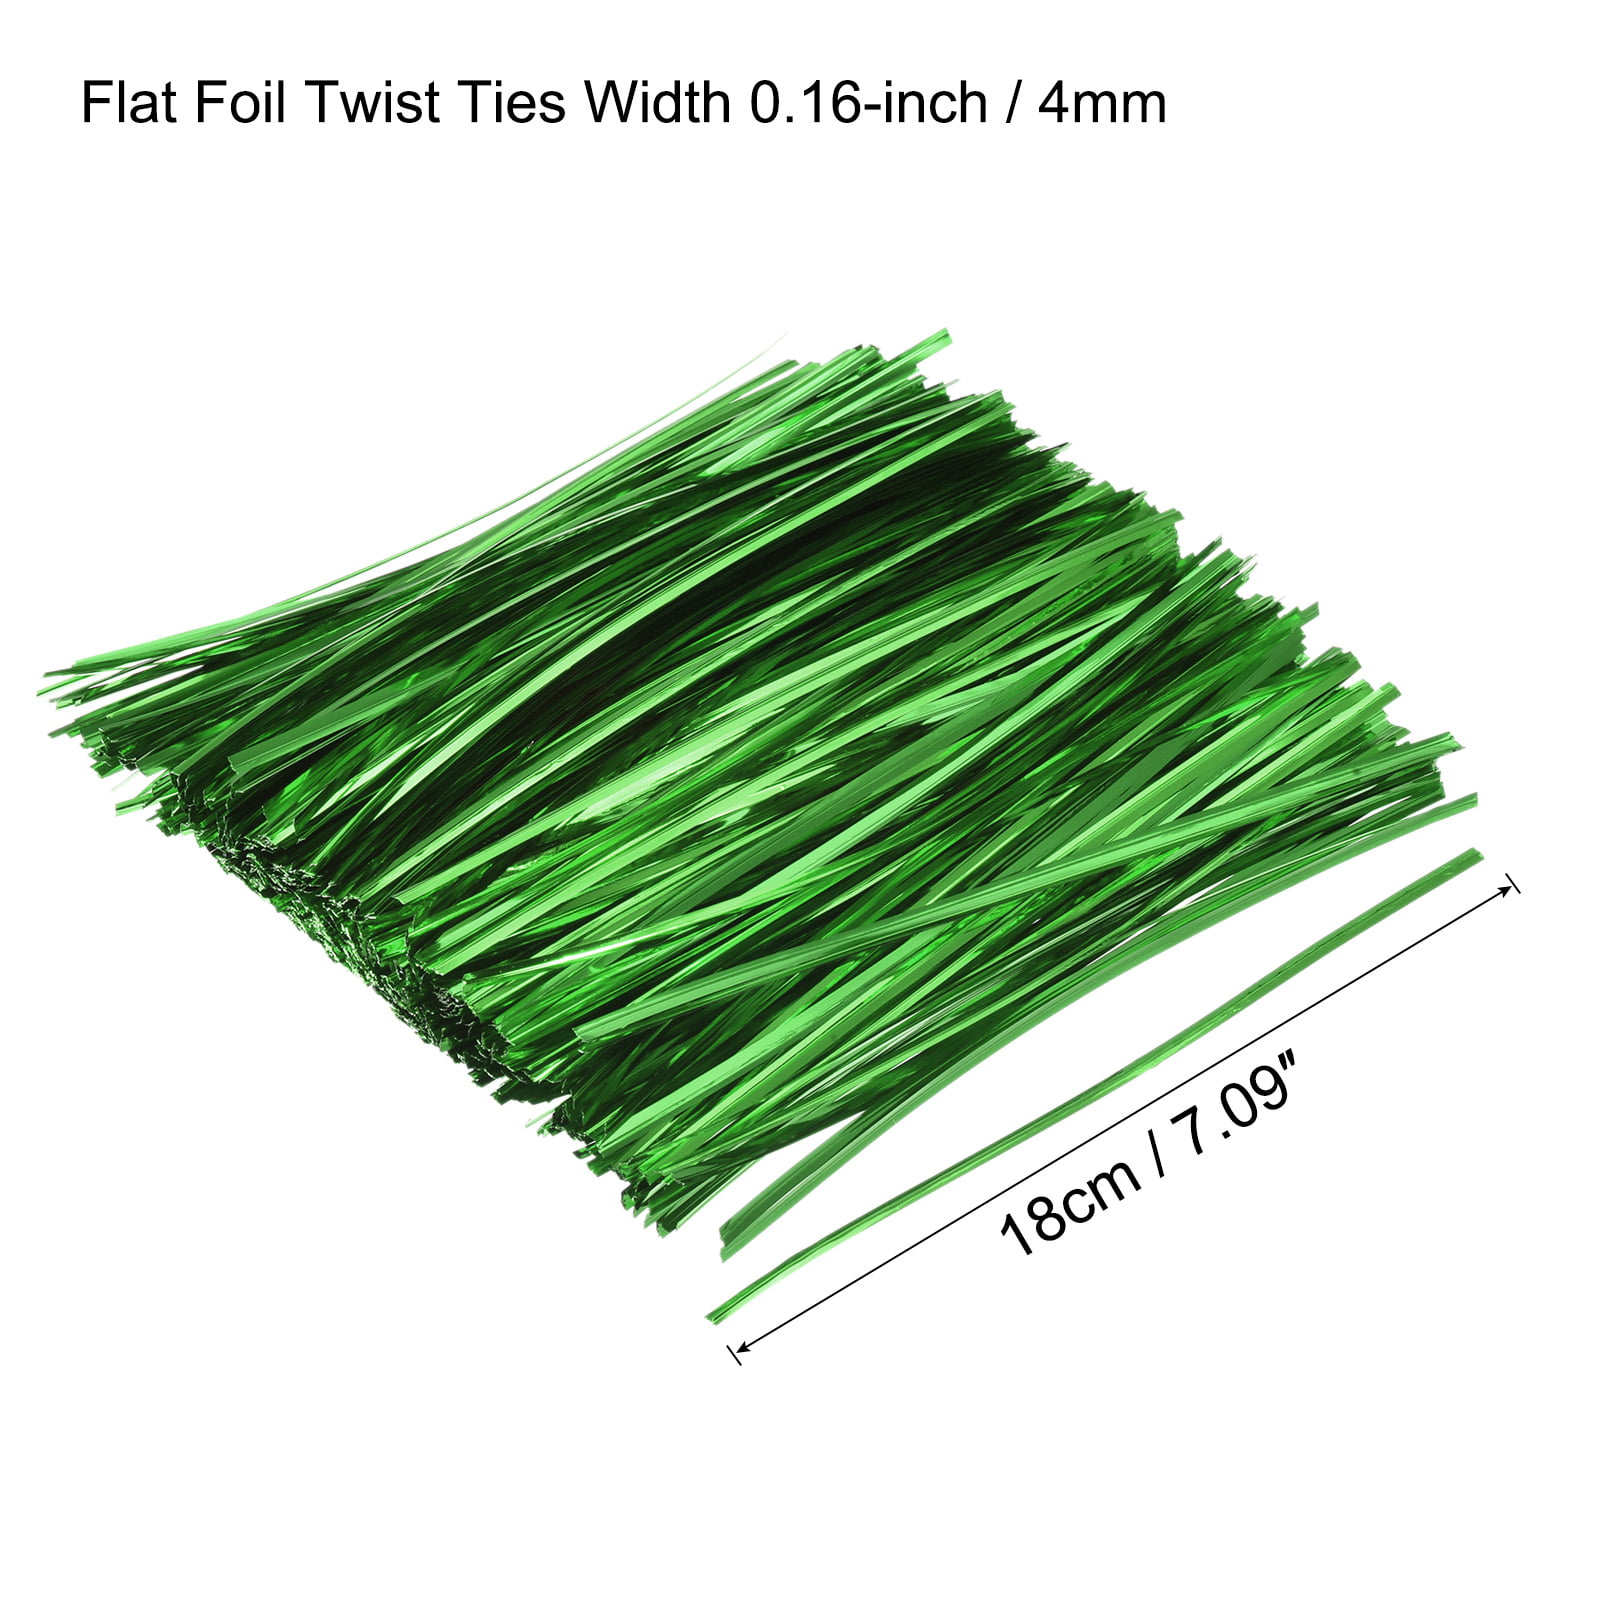 Uxcell Foil Twist Ties 7 Plastic Closure Tie for Tying Bread, Candy,  Cookies, Gift Bags, Green 750 Pack 